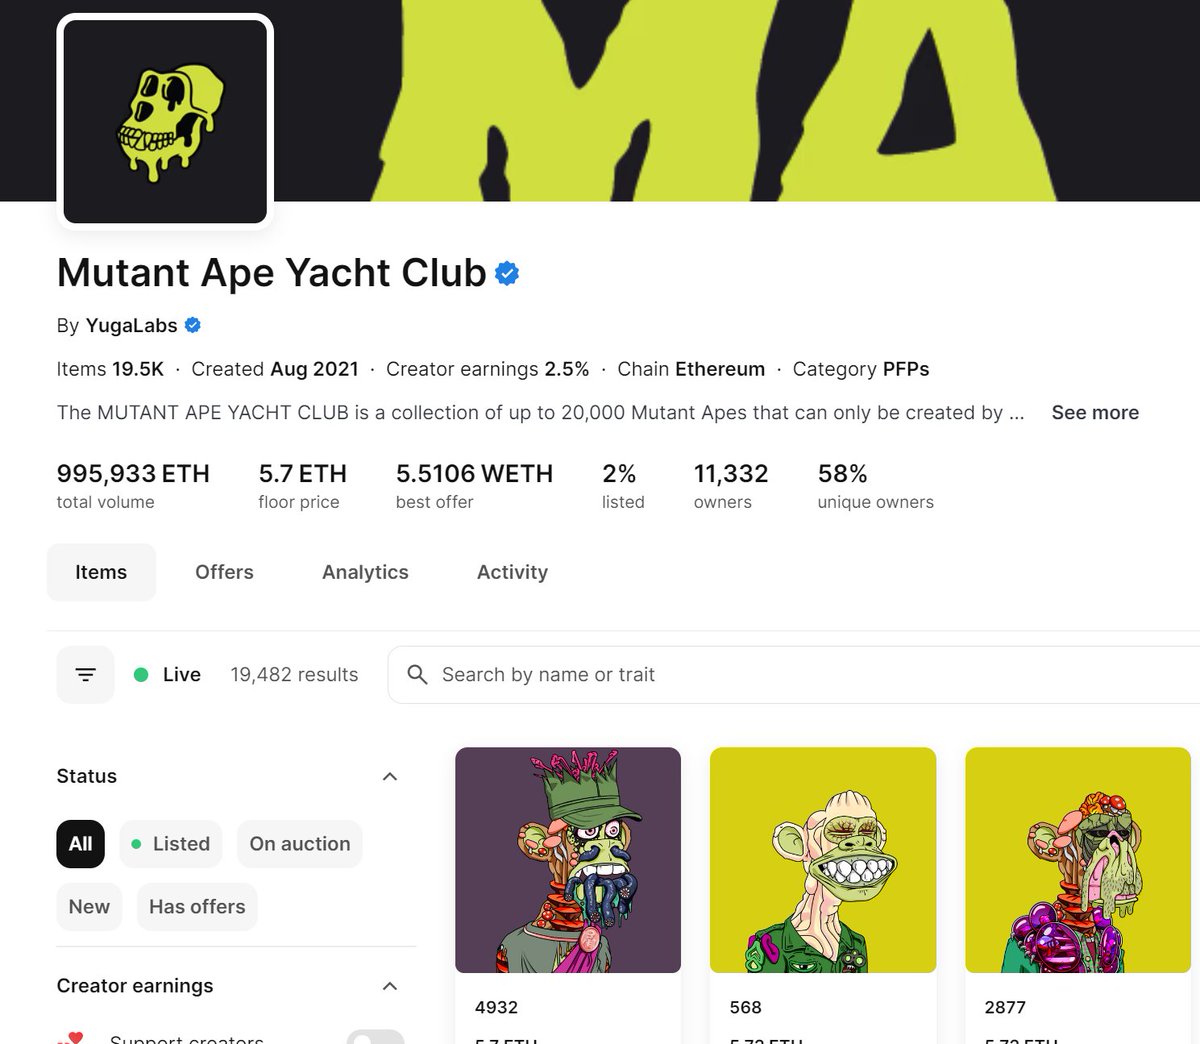 Real talk which is a better buy right now today!?

Mutant Ape Yacht Club - 5.7 eth

Or 999 Club? 4.7 eth